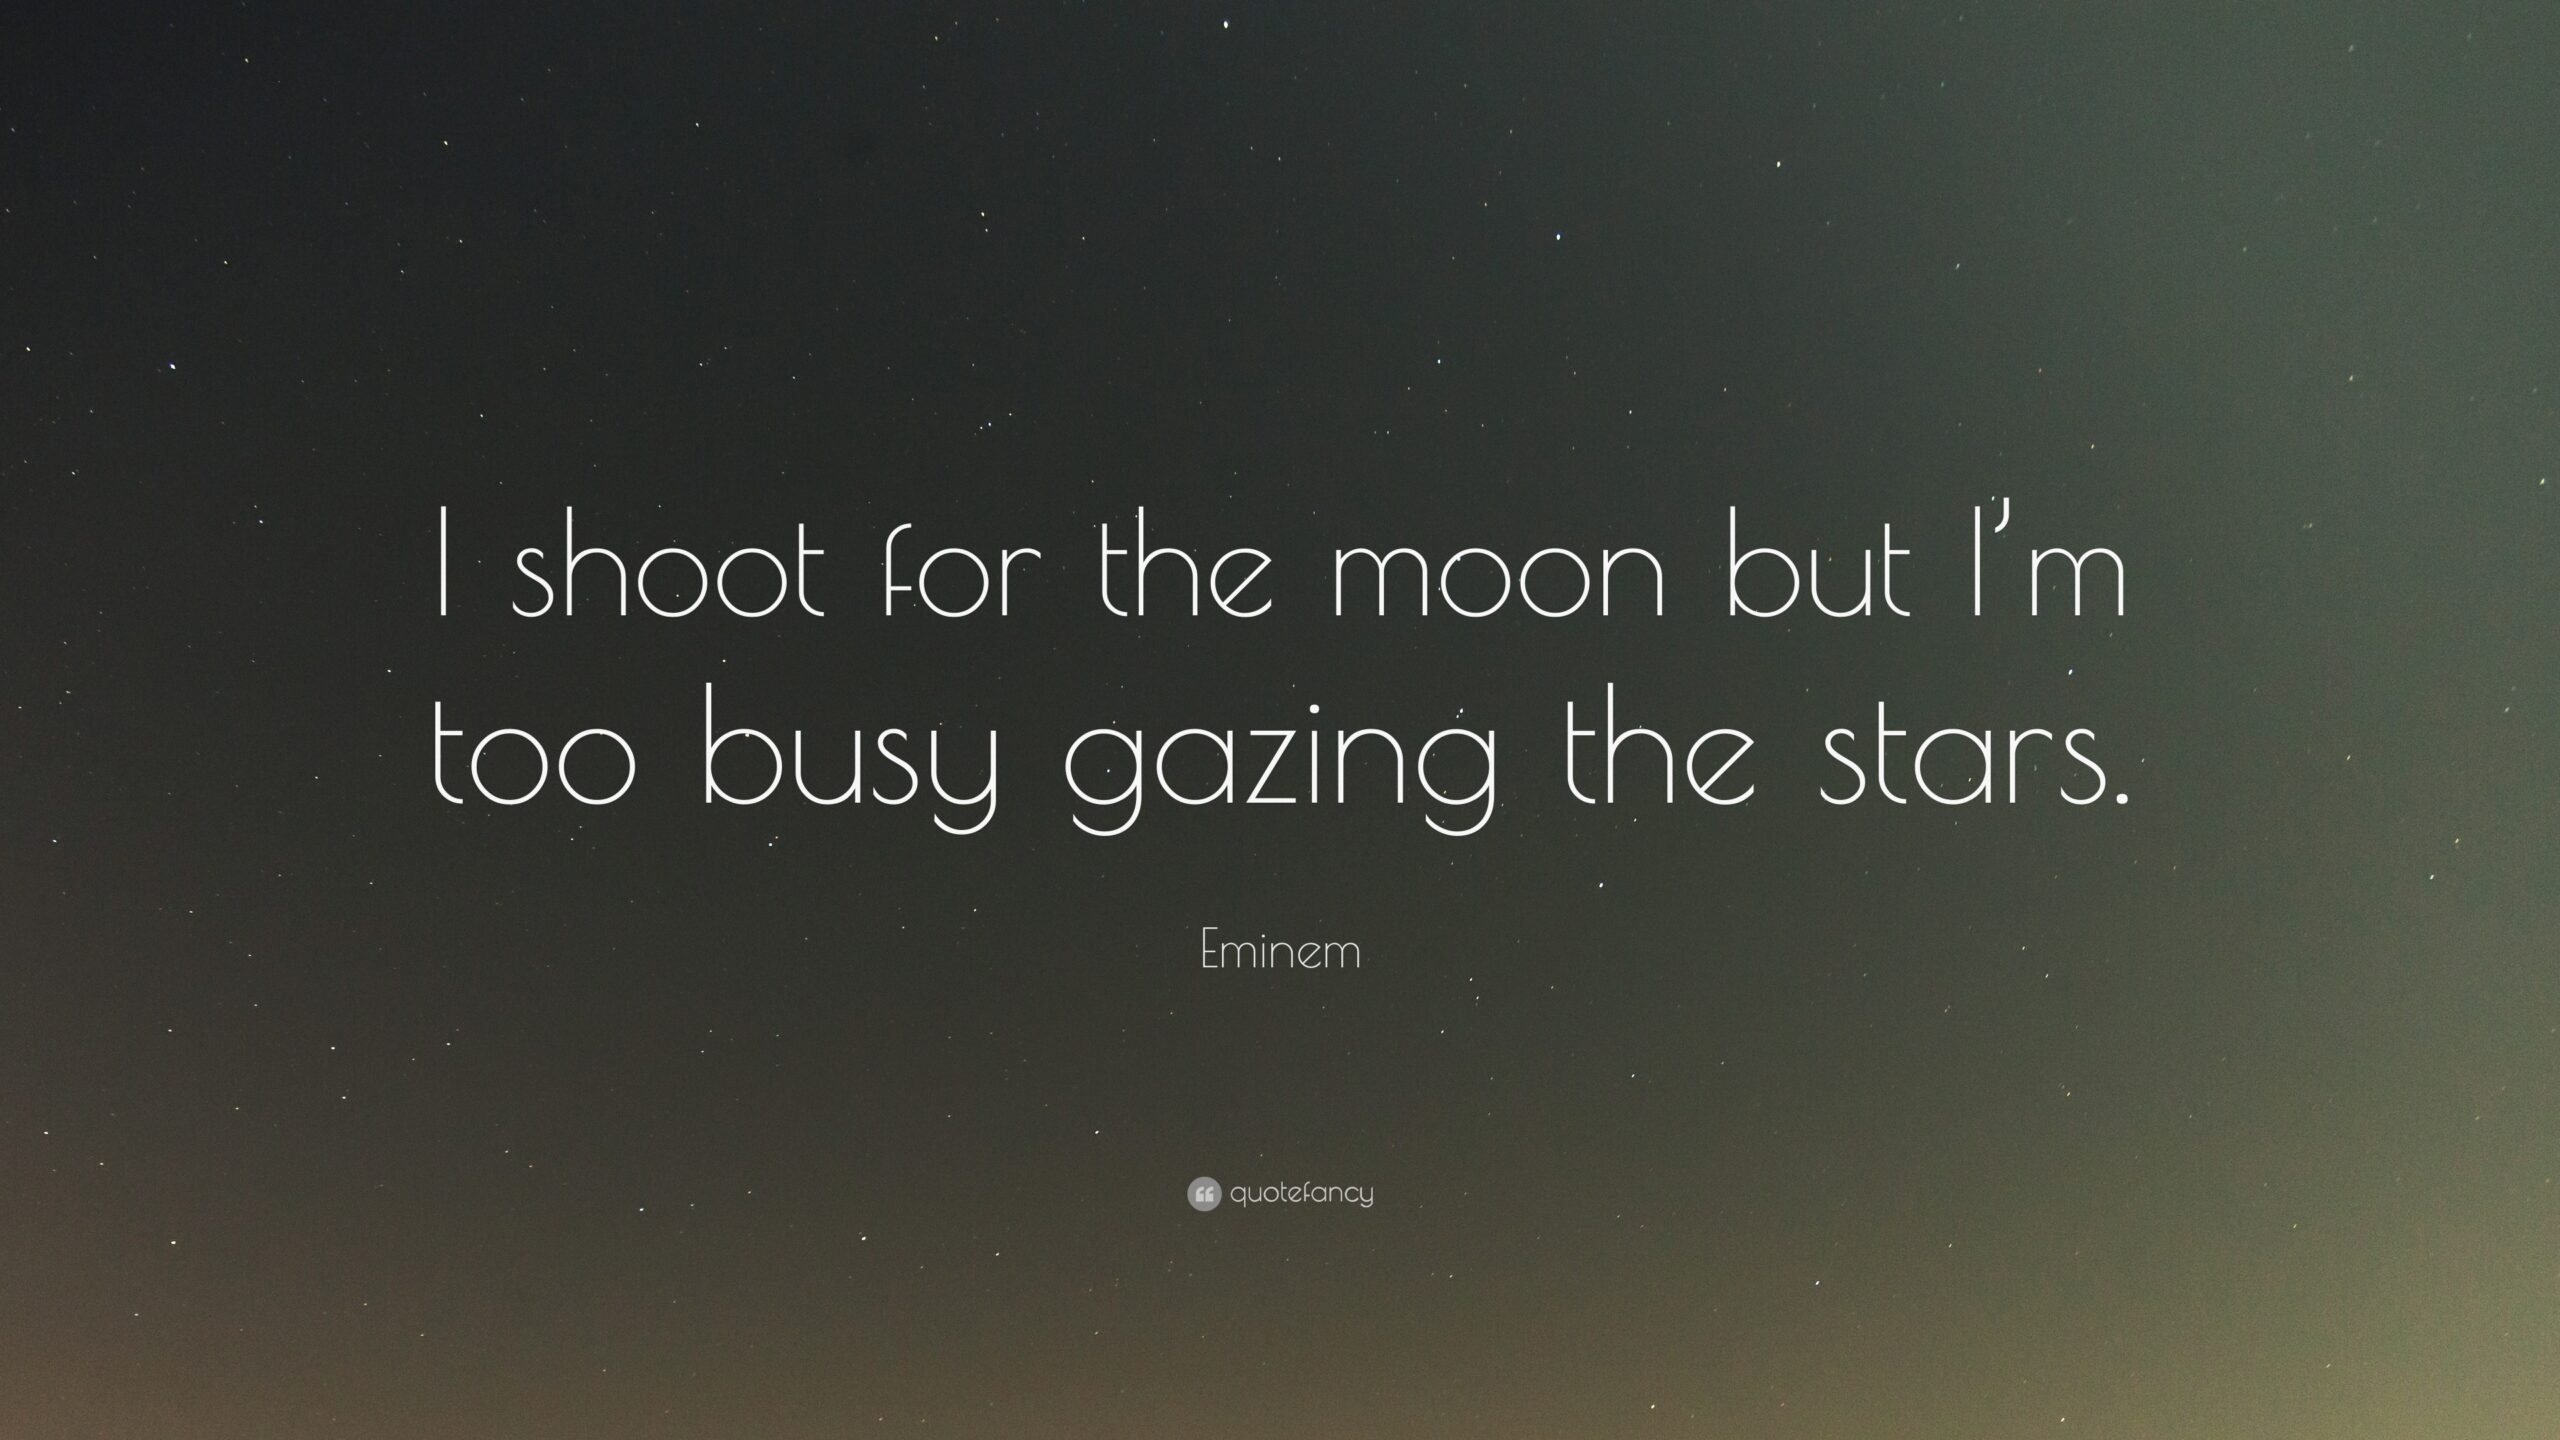 I Shoot For The Moon But I’m Too Busy Gazing The Stars